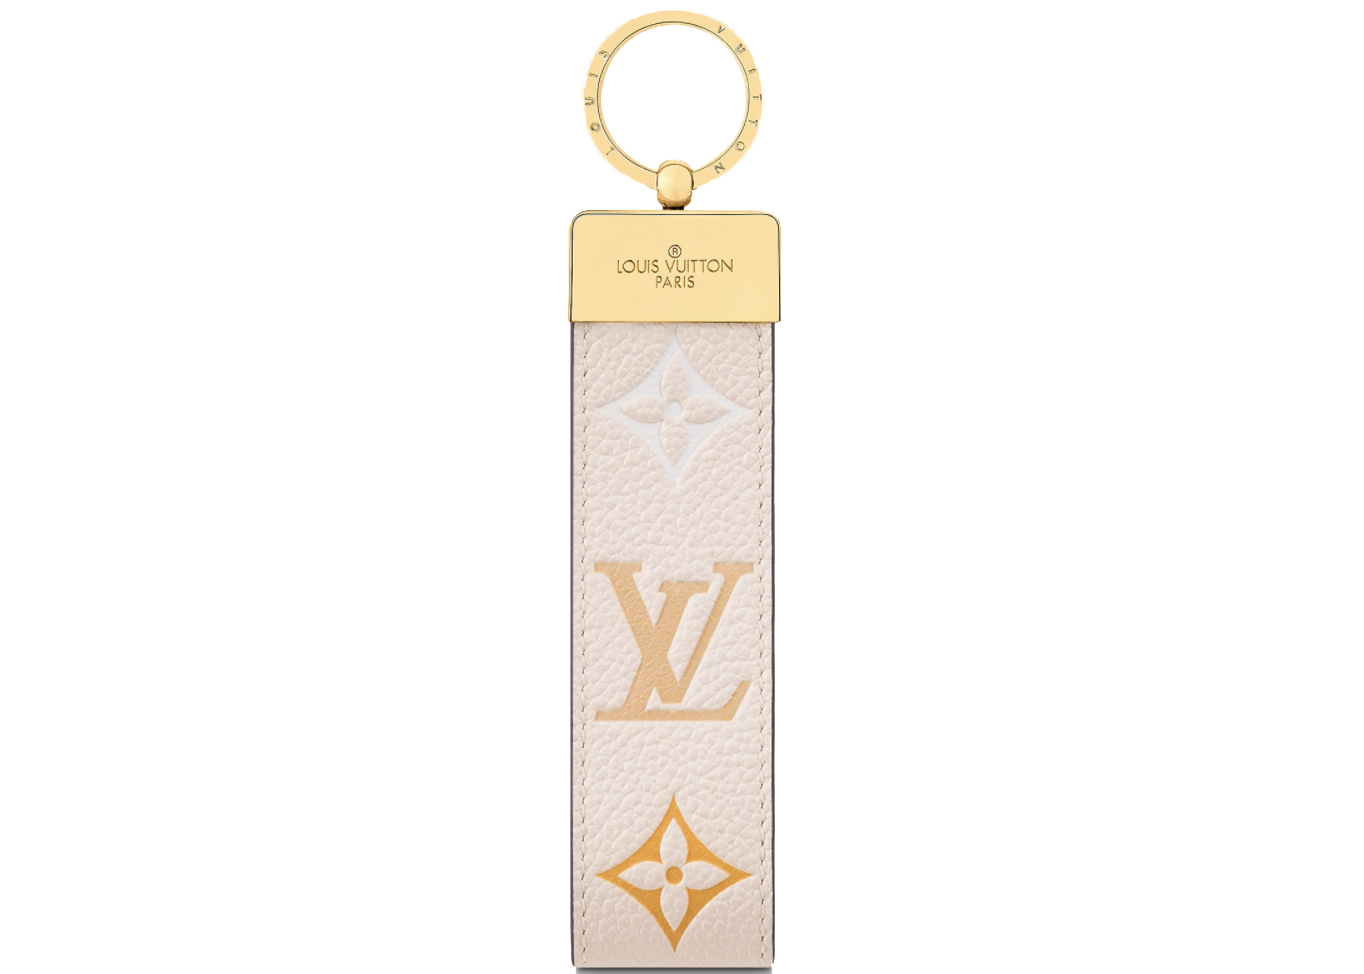 LV Record Tab Key Holder And Bag Charm S00  Accessories  LOUIS VUITTON